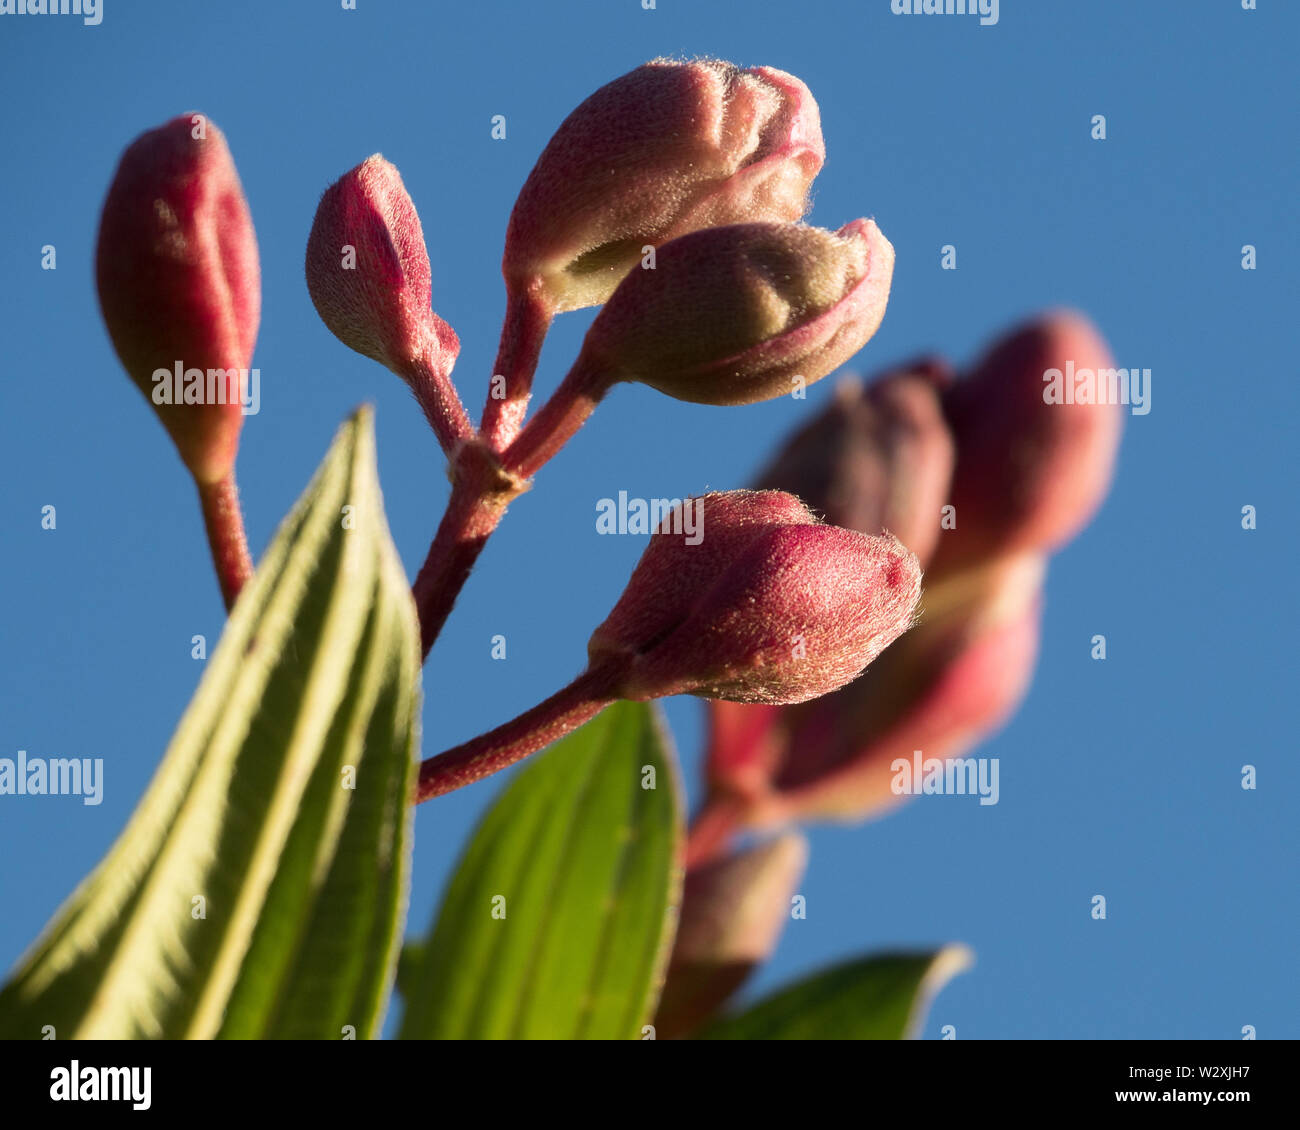 Purple red and slightly fuzzy Tibouchina Buds ready to bloom, blue sky background Stock Photo